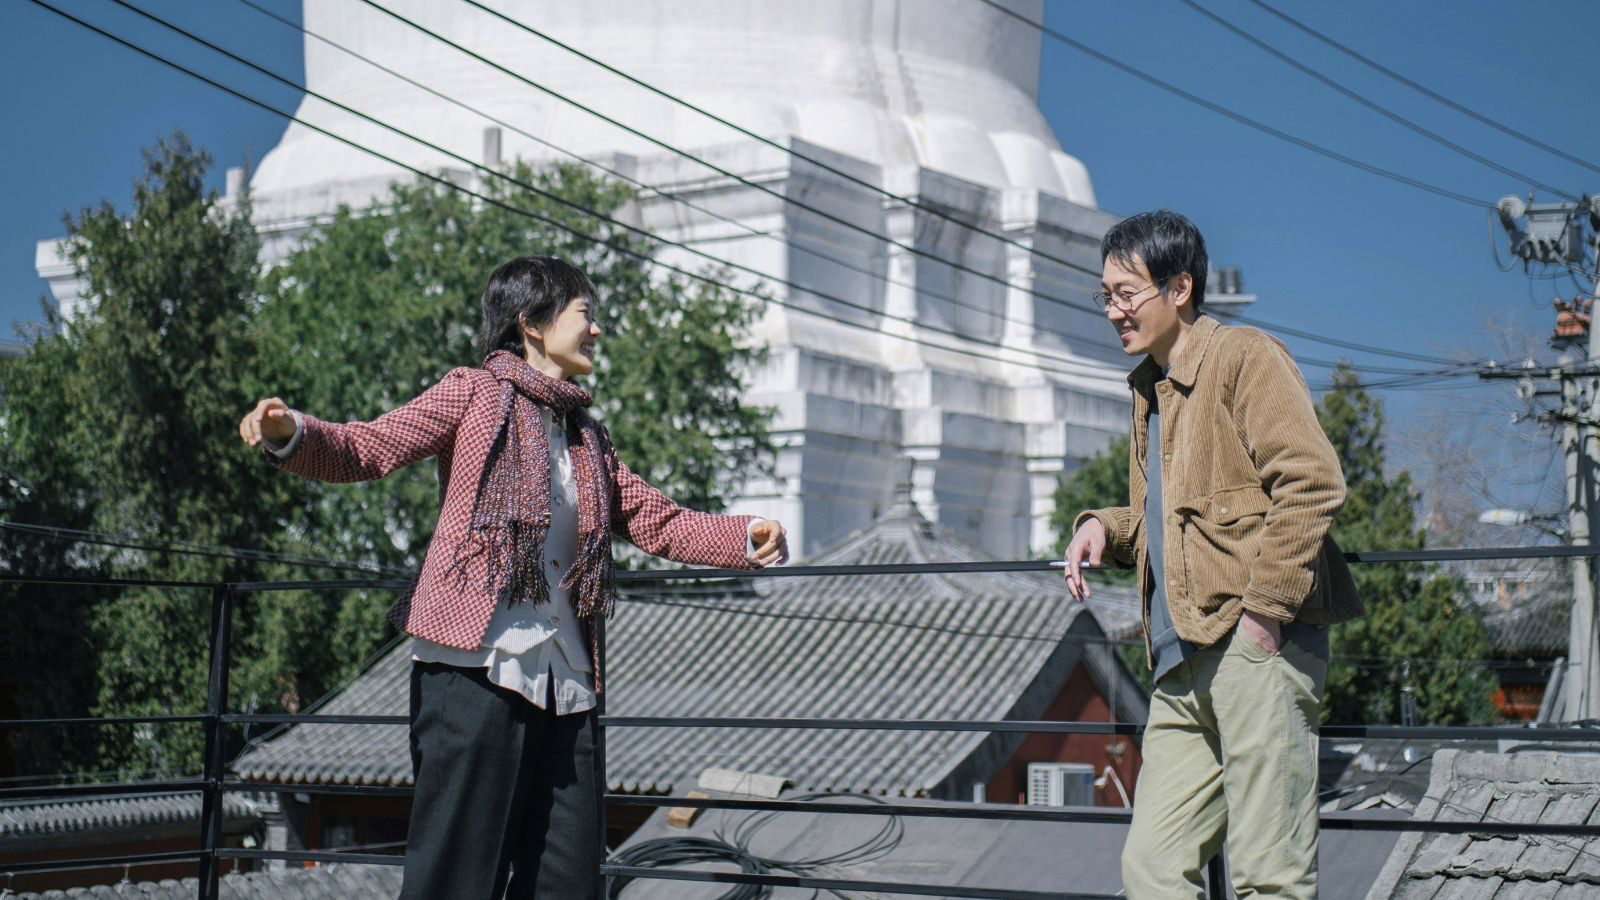 A man and a woman are talking to each other on a roof.